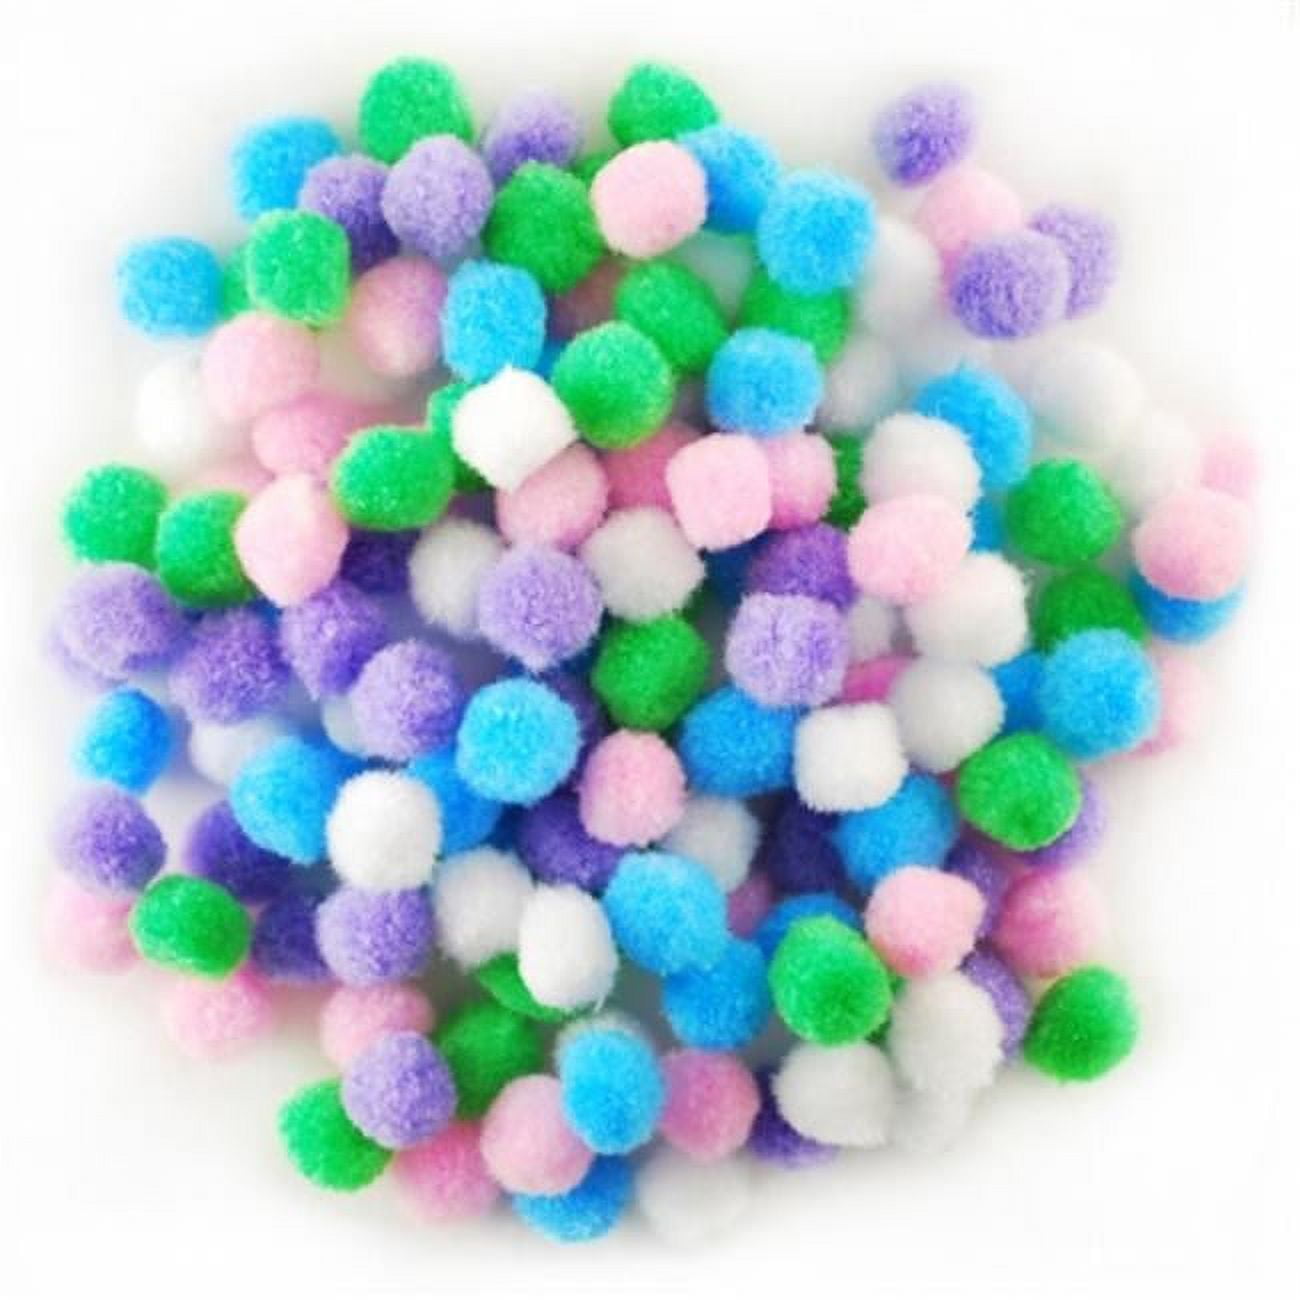 Colorations Super Fluffy Soft Acrylic Mini Pom Poms, Set of 450, 1/4 to 1/2  inch, Resealable Bag, for Kids, Arts & Crafts, DIY Crafts, Hobby Supplies